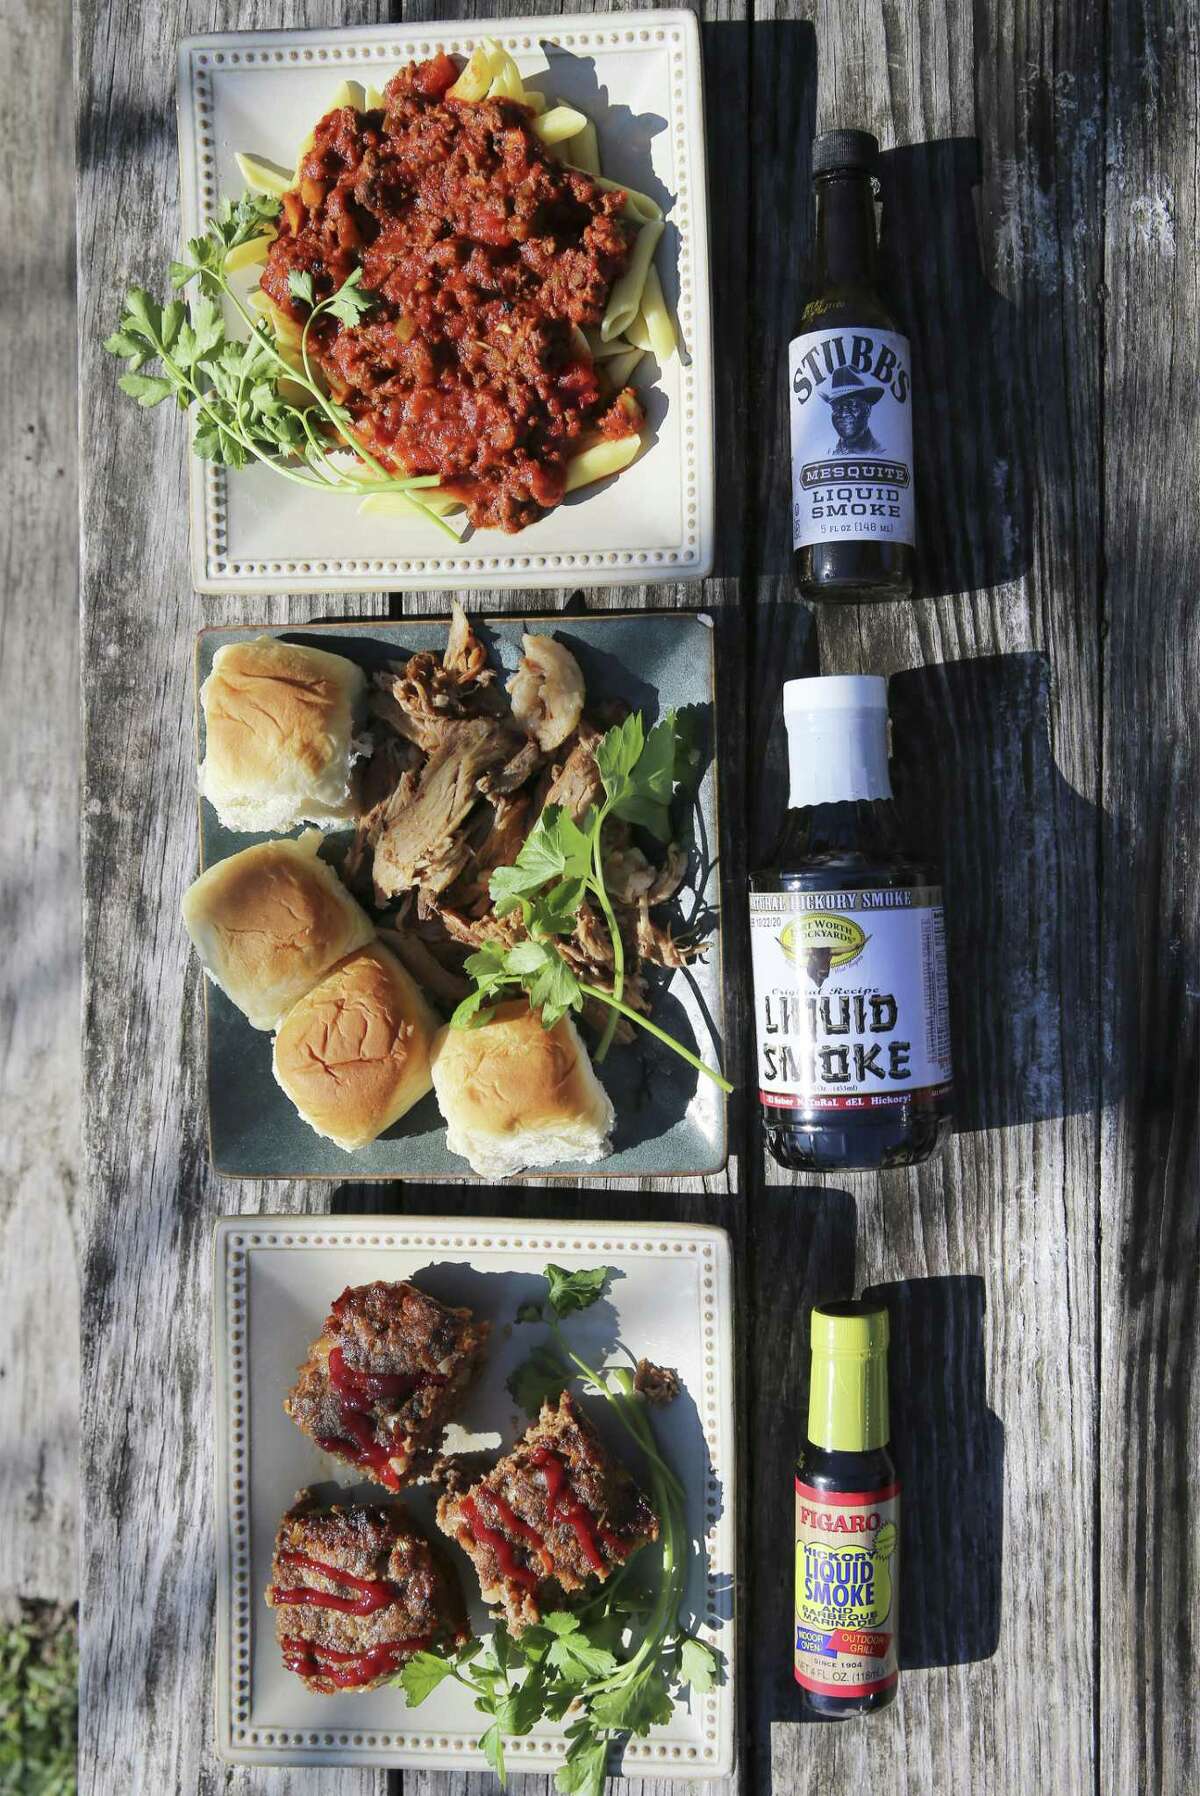 Liquid smoke can be added to a wide variety of dishes, including pulled pork sliders, smoked meatloaf and as a flavor agent for meat pasta sauce.